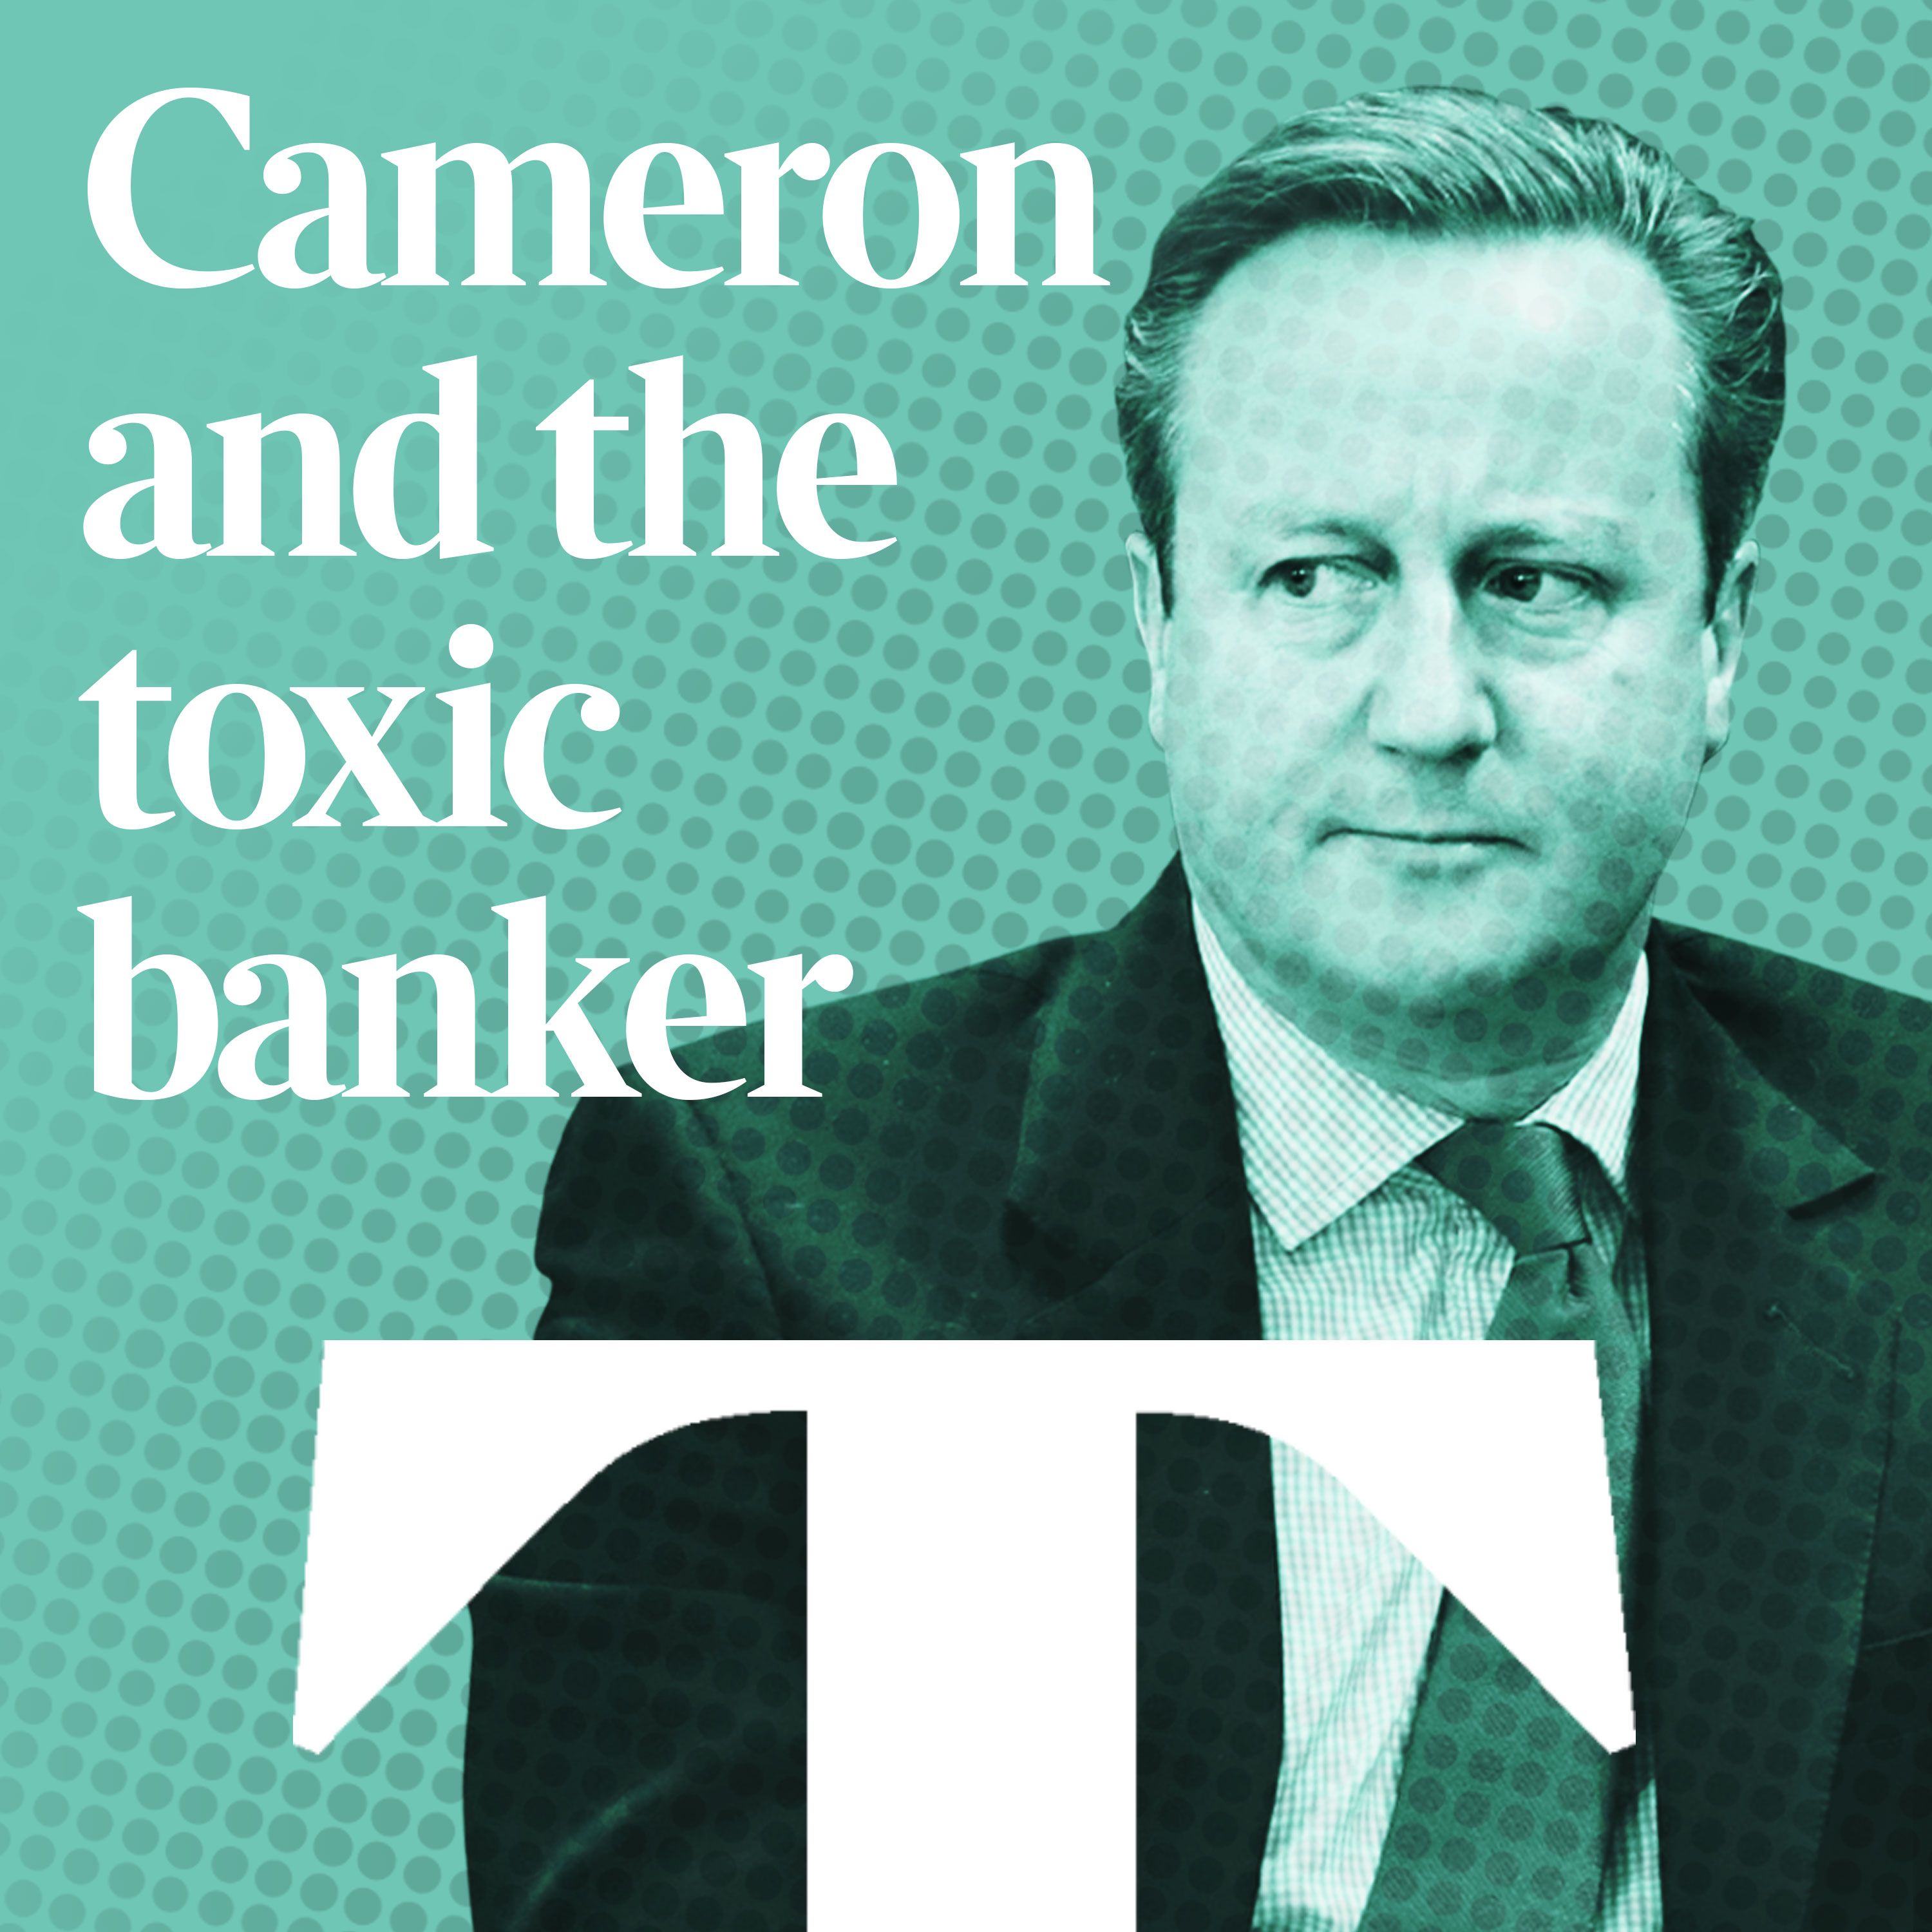 Cameron and the toxic banker (Pt 5): The crash